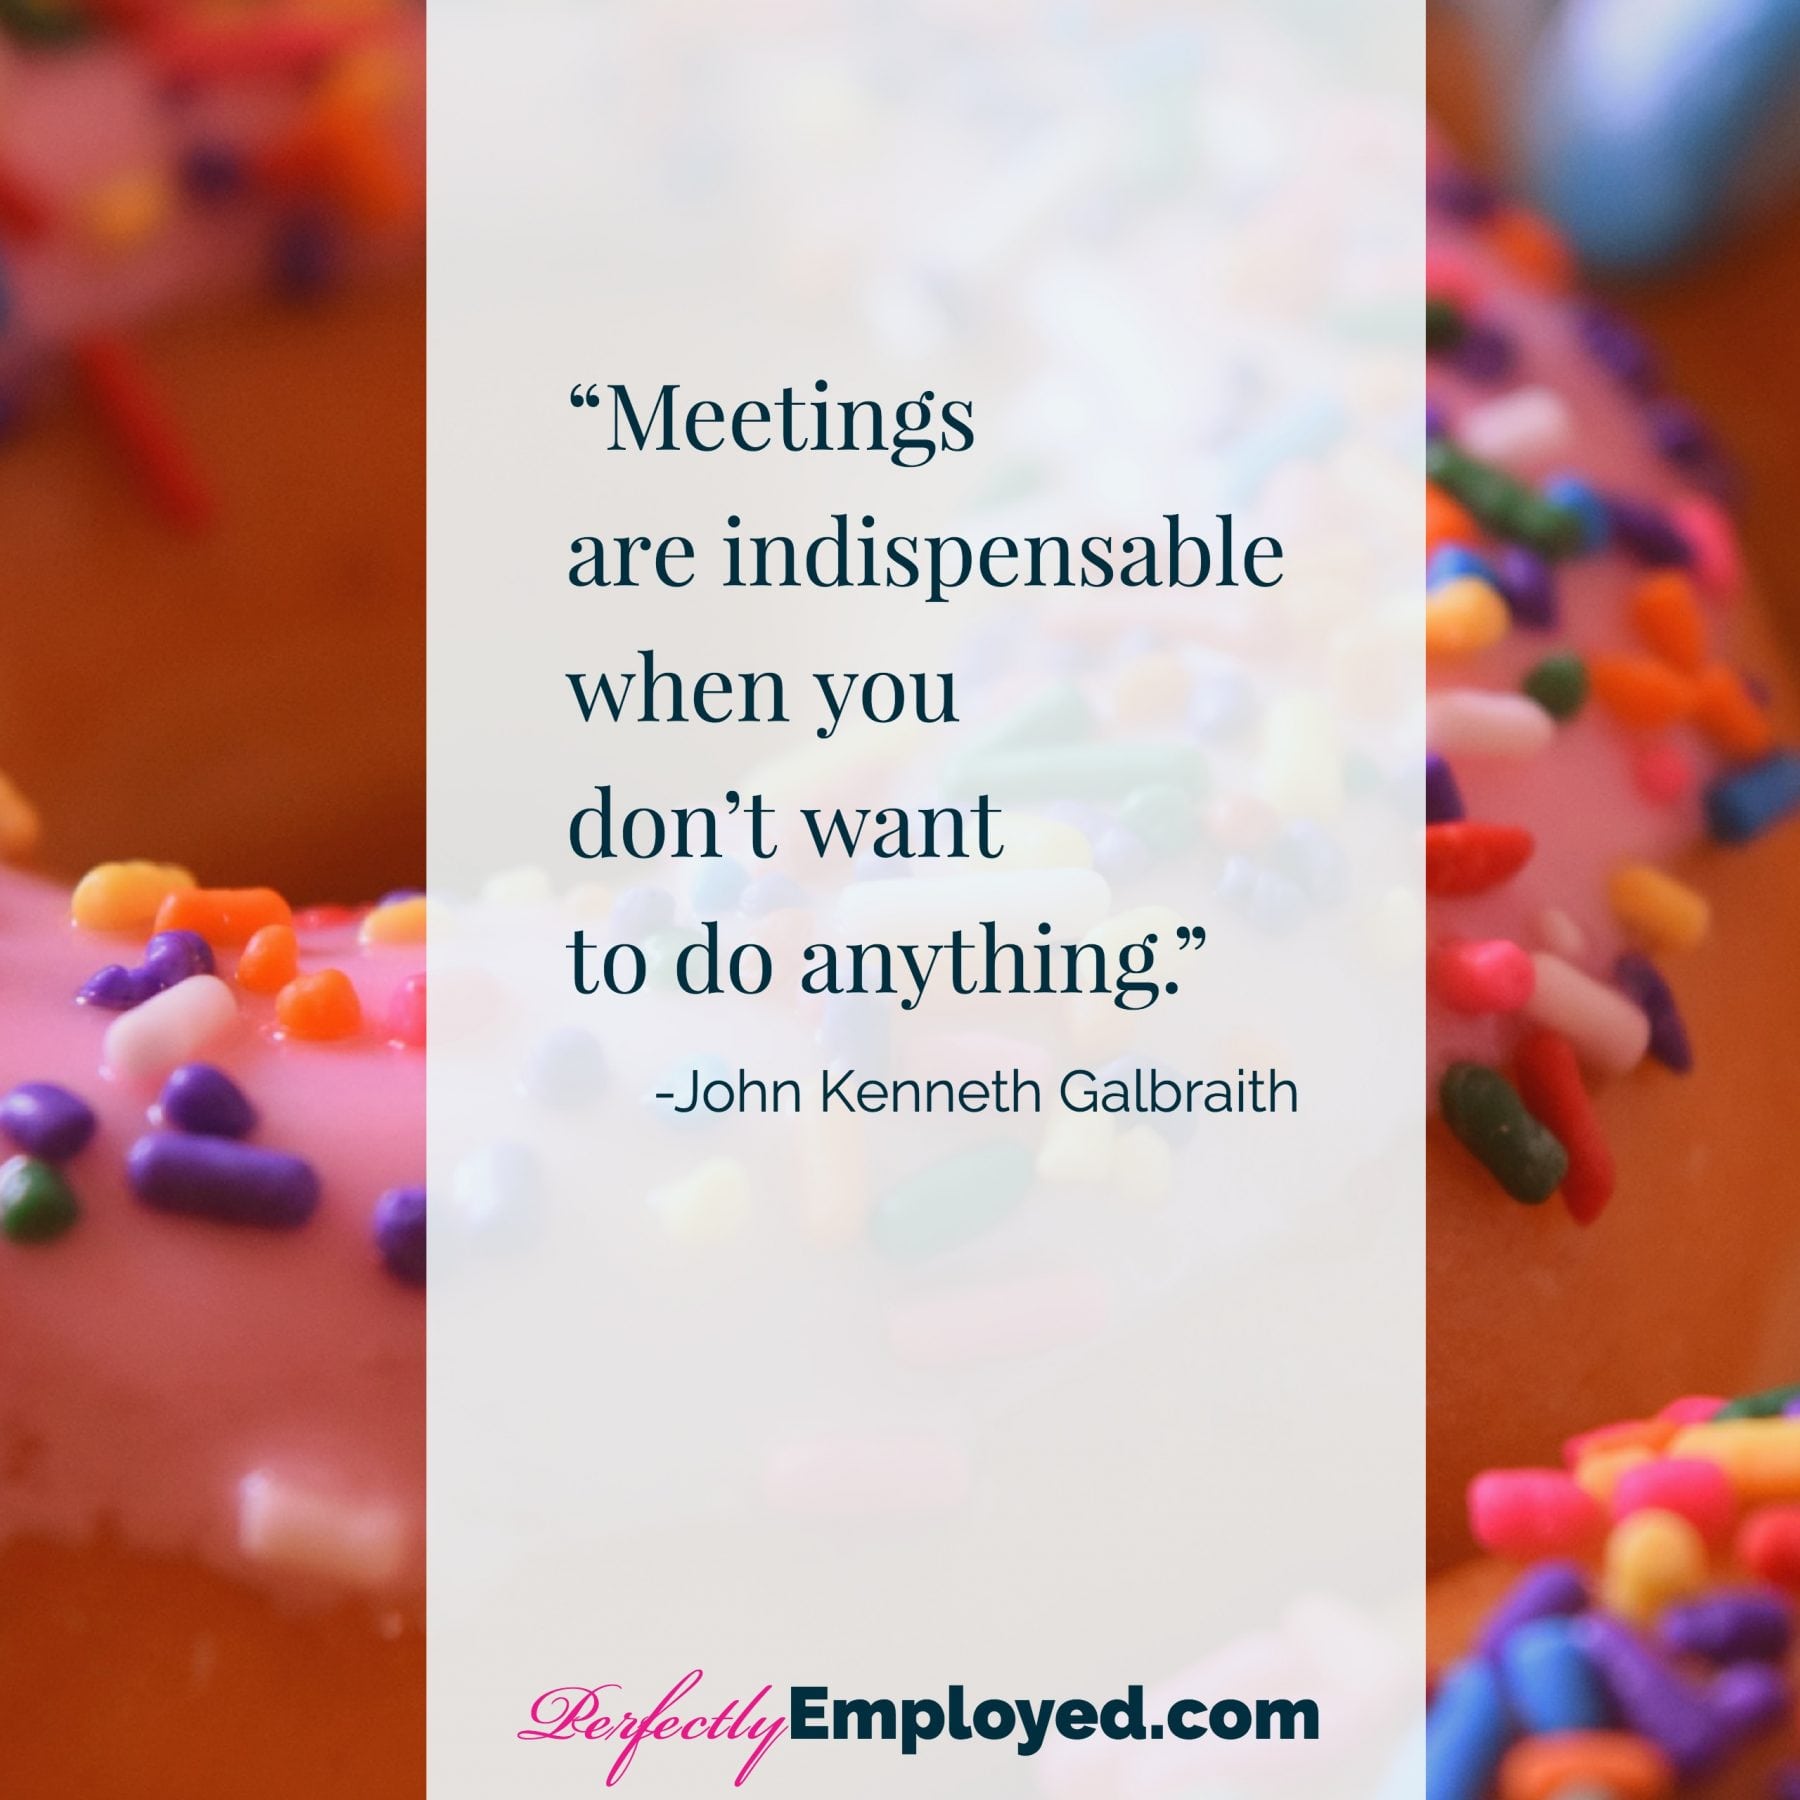 Meetings are indispensable when you don’t want to do anything.